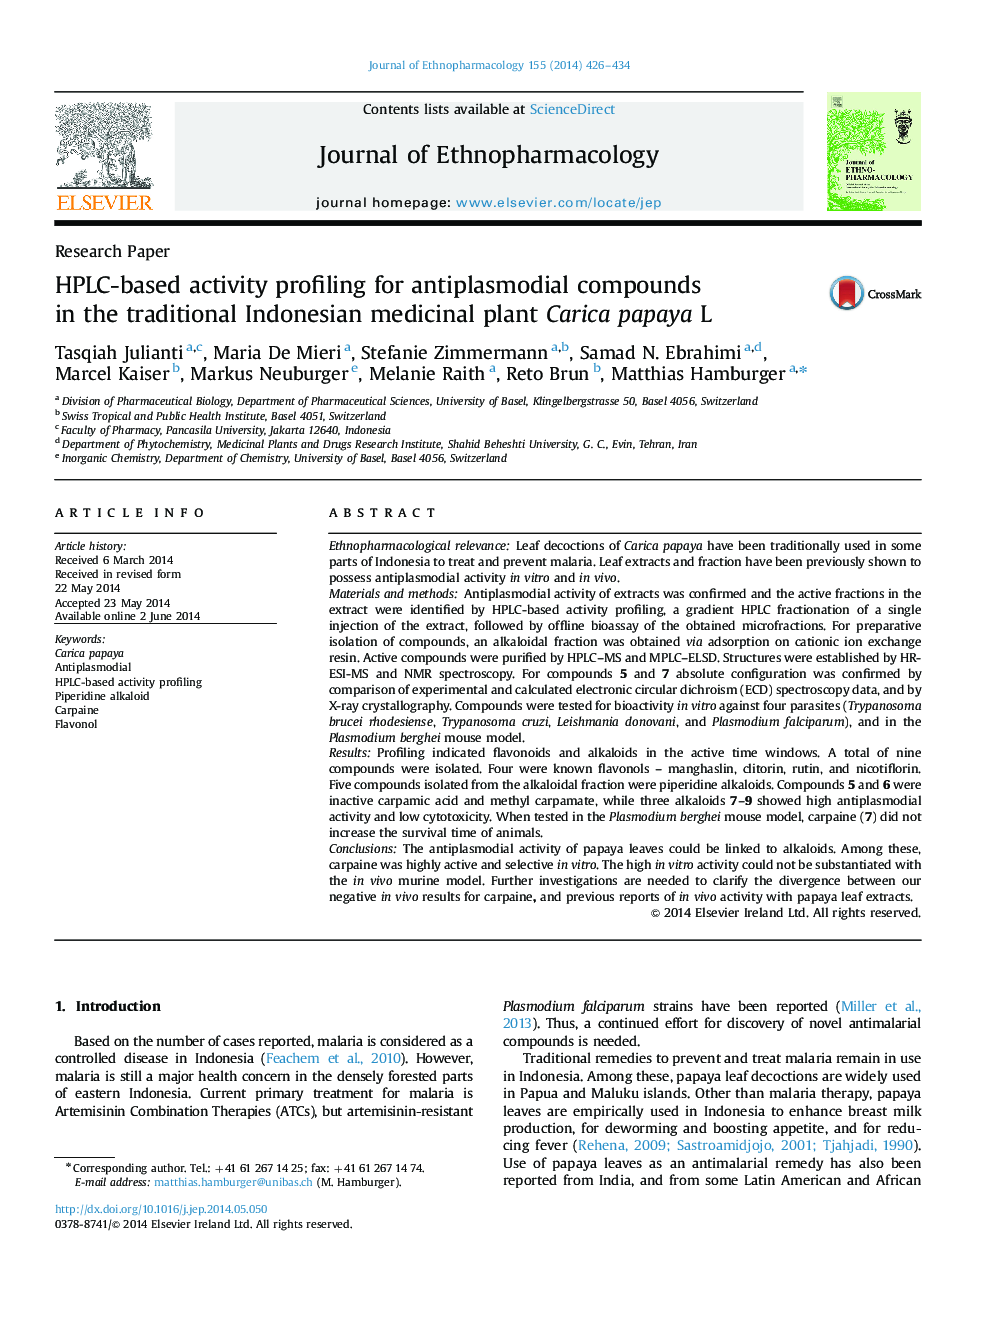 Research PaperHPLC-based activity profiling for antiplasmodial compounds in the traditional Indonesian medicinal plant Carica papaya L